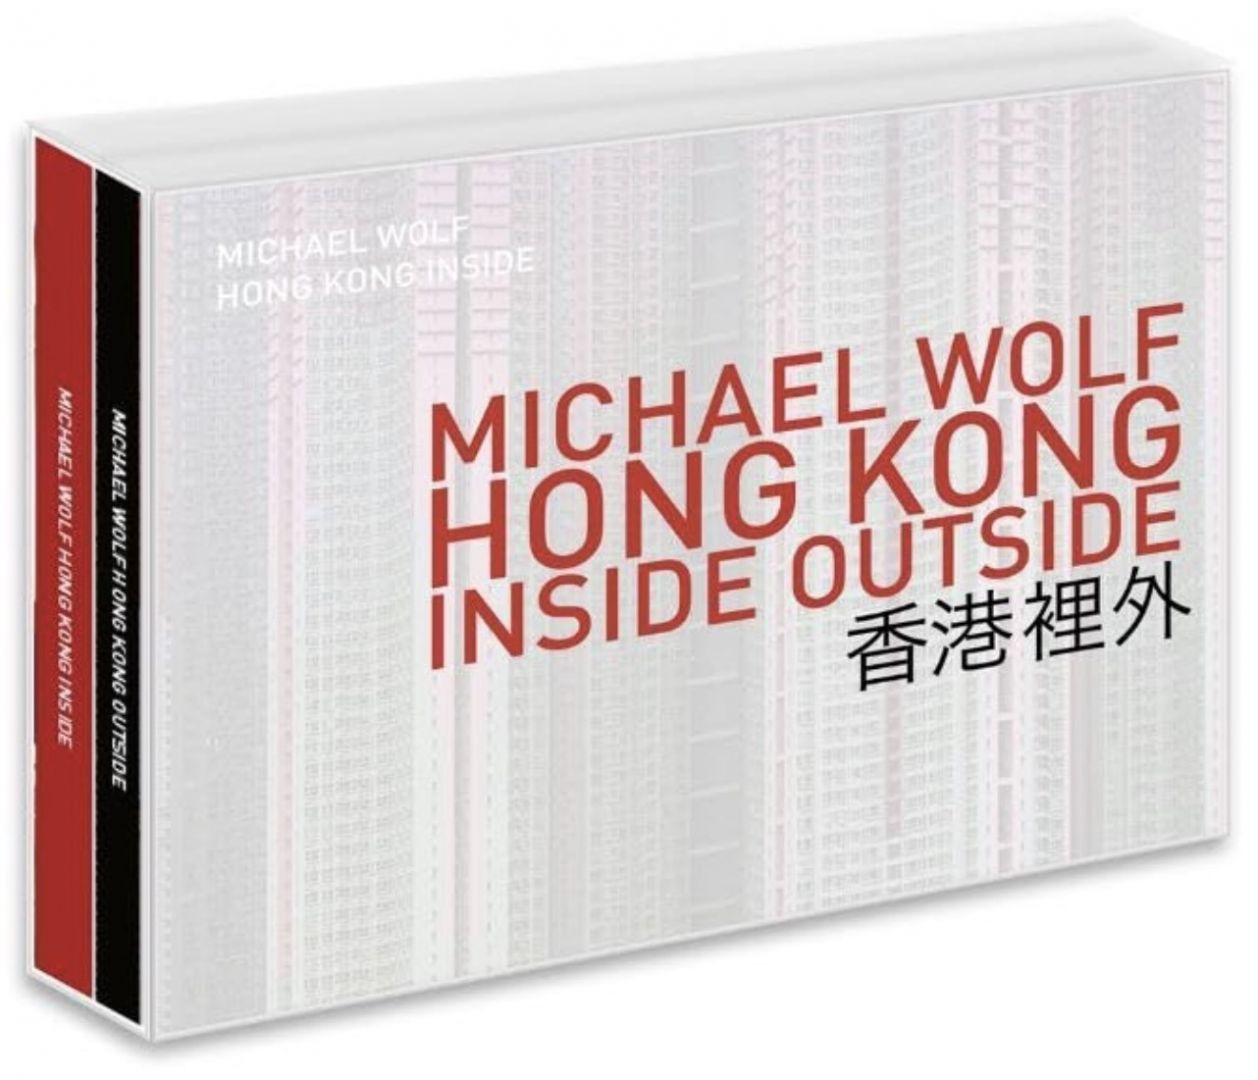 Michael Wolf – Hong Kong Inside Outside – 1st edition – signed